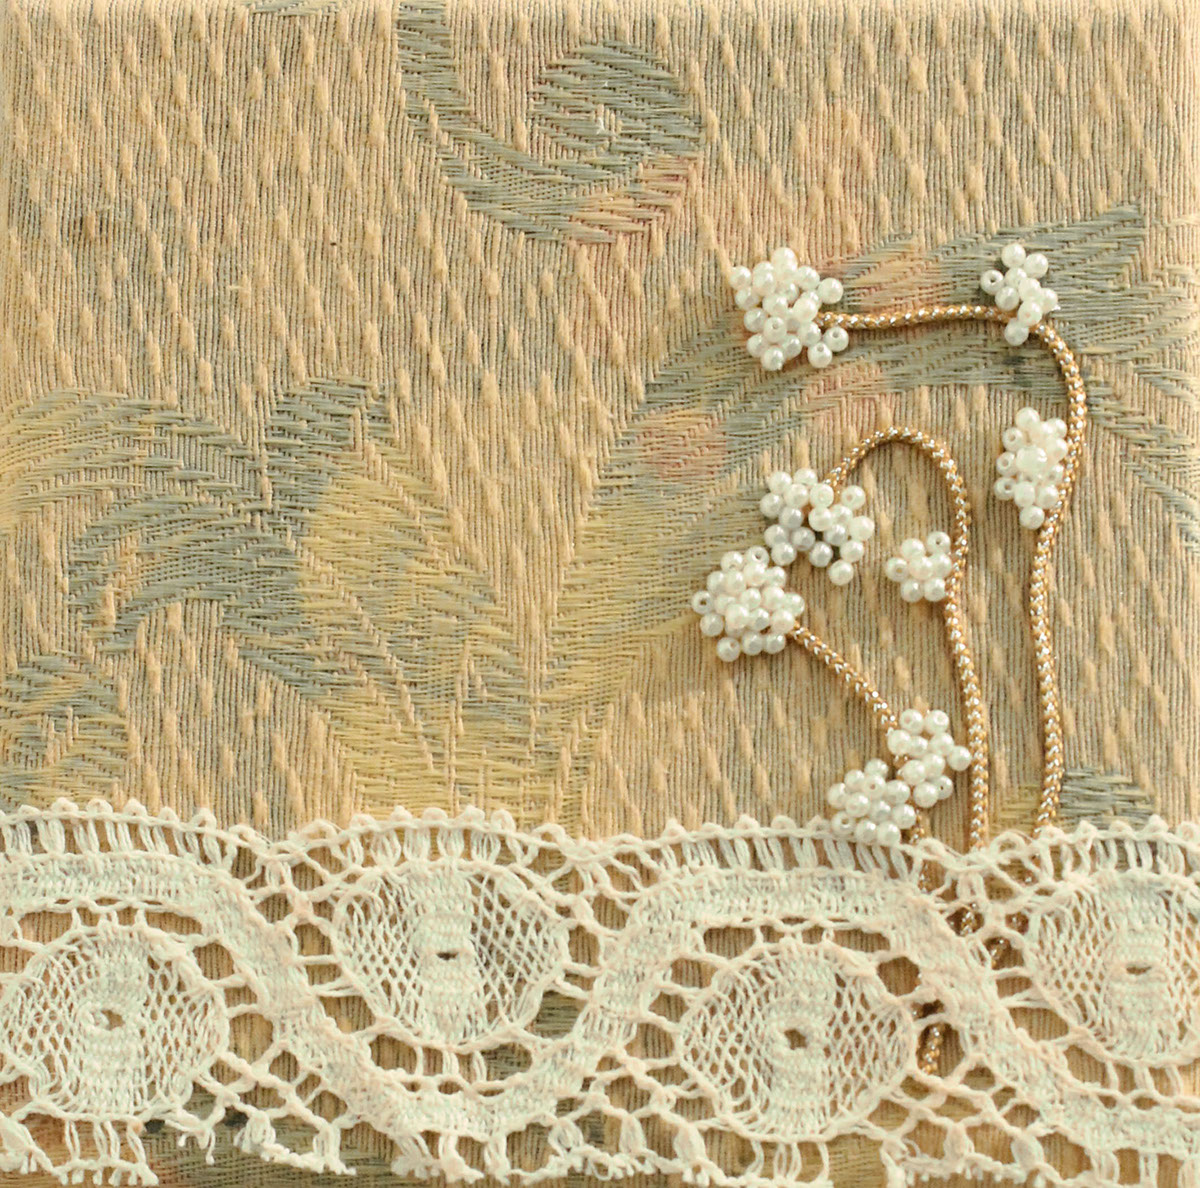 printmaking mixed media collage fabric lace pastel